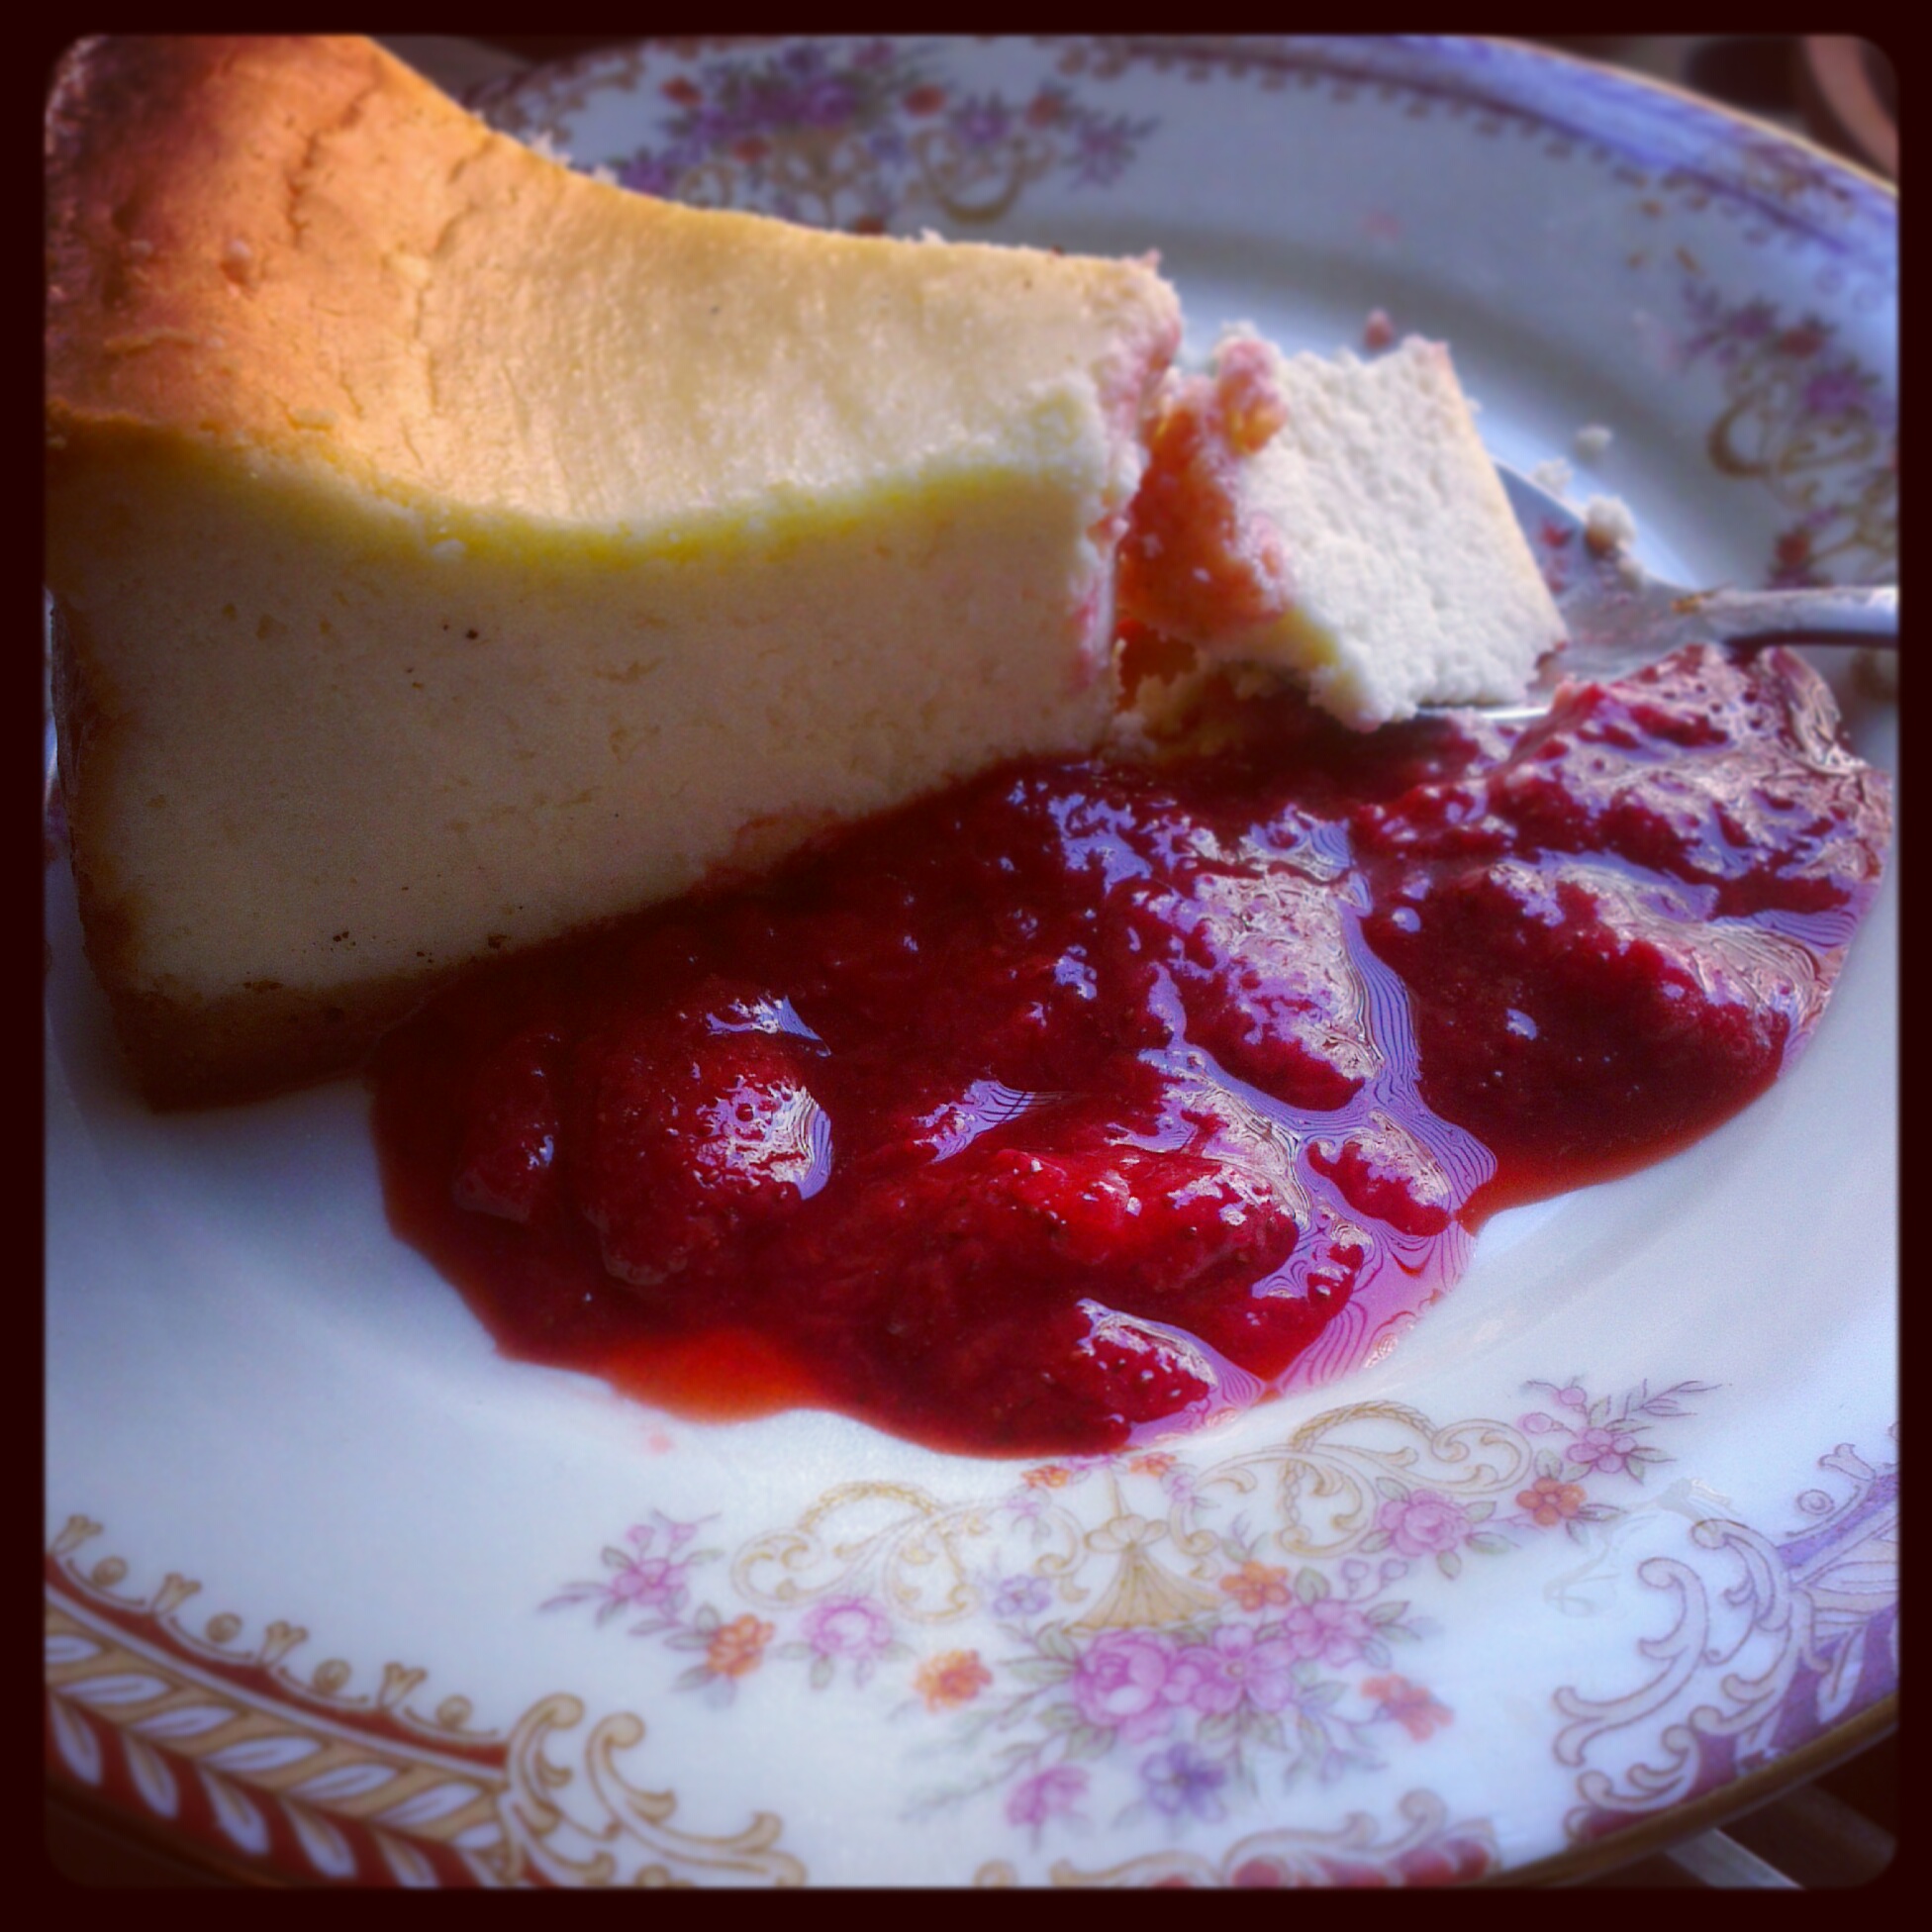 Classic Baked Lemon Cheesecake with a Balsamic Strawberry Compote